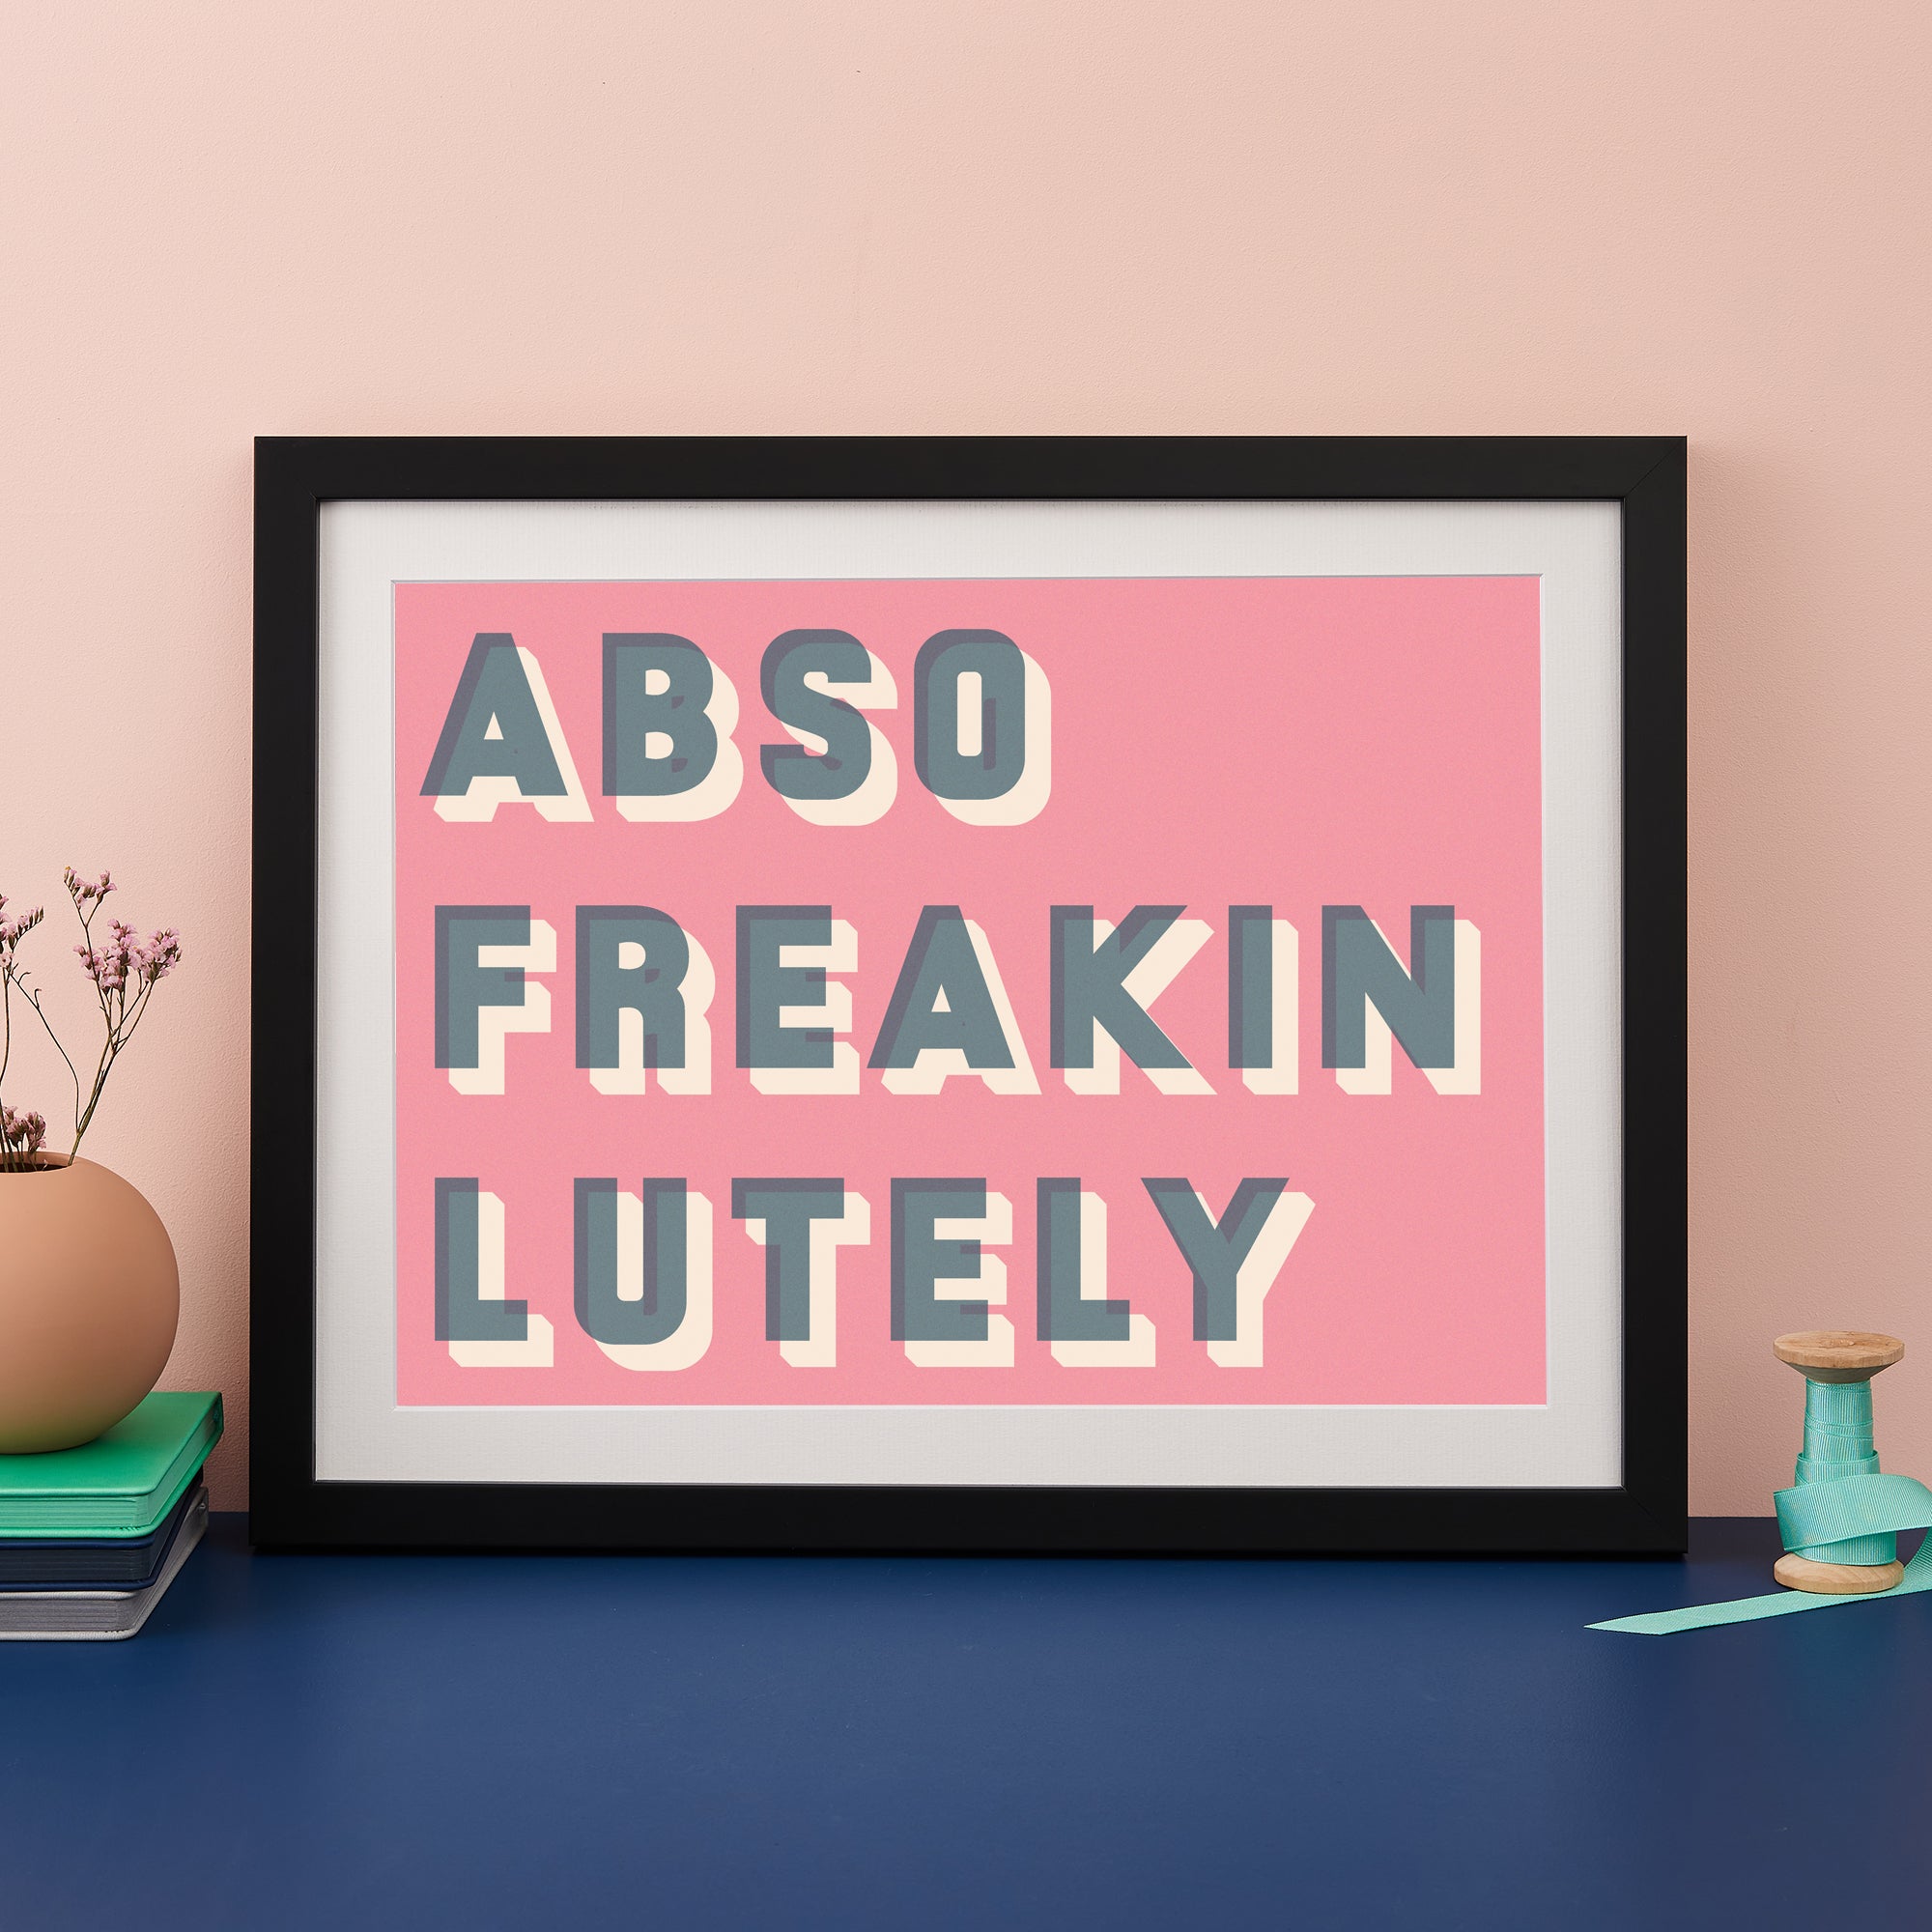 Black framed typographic print saying Abso Freakin Lutely on a pink background